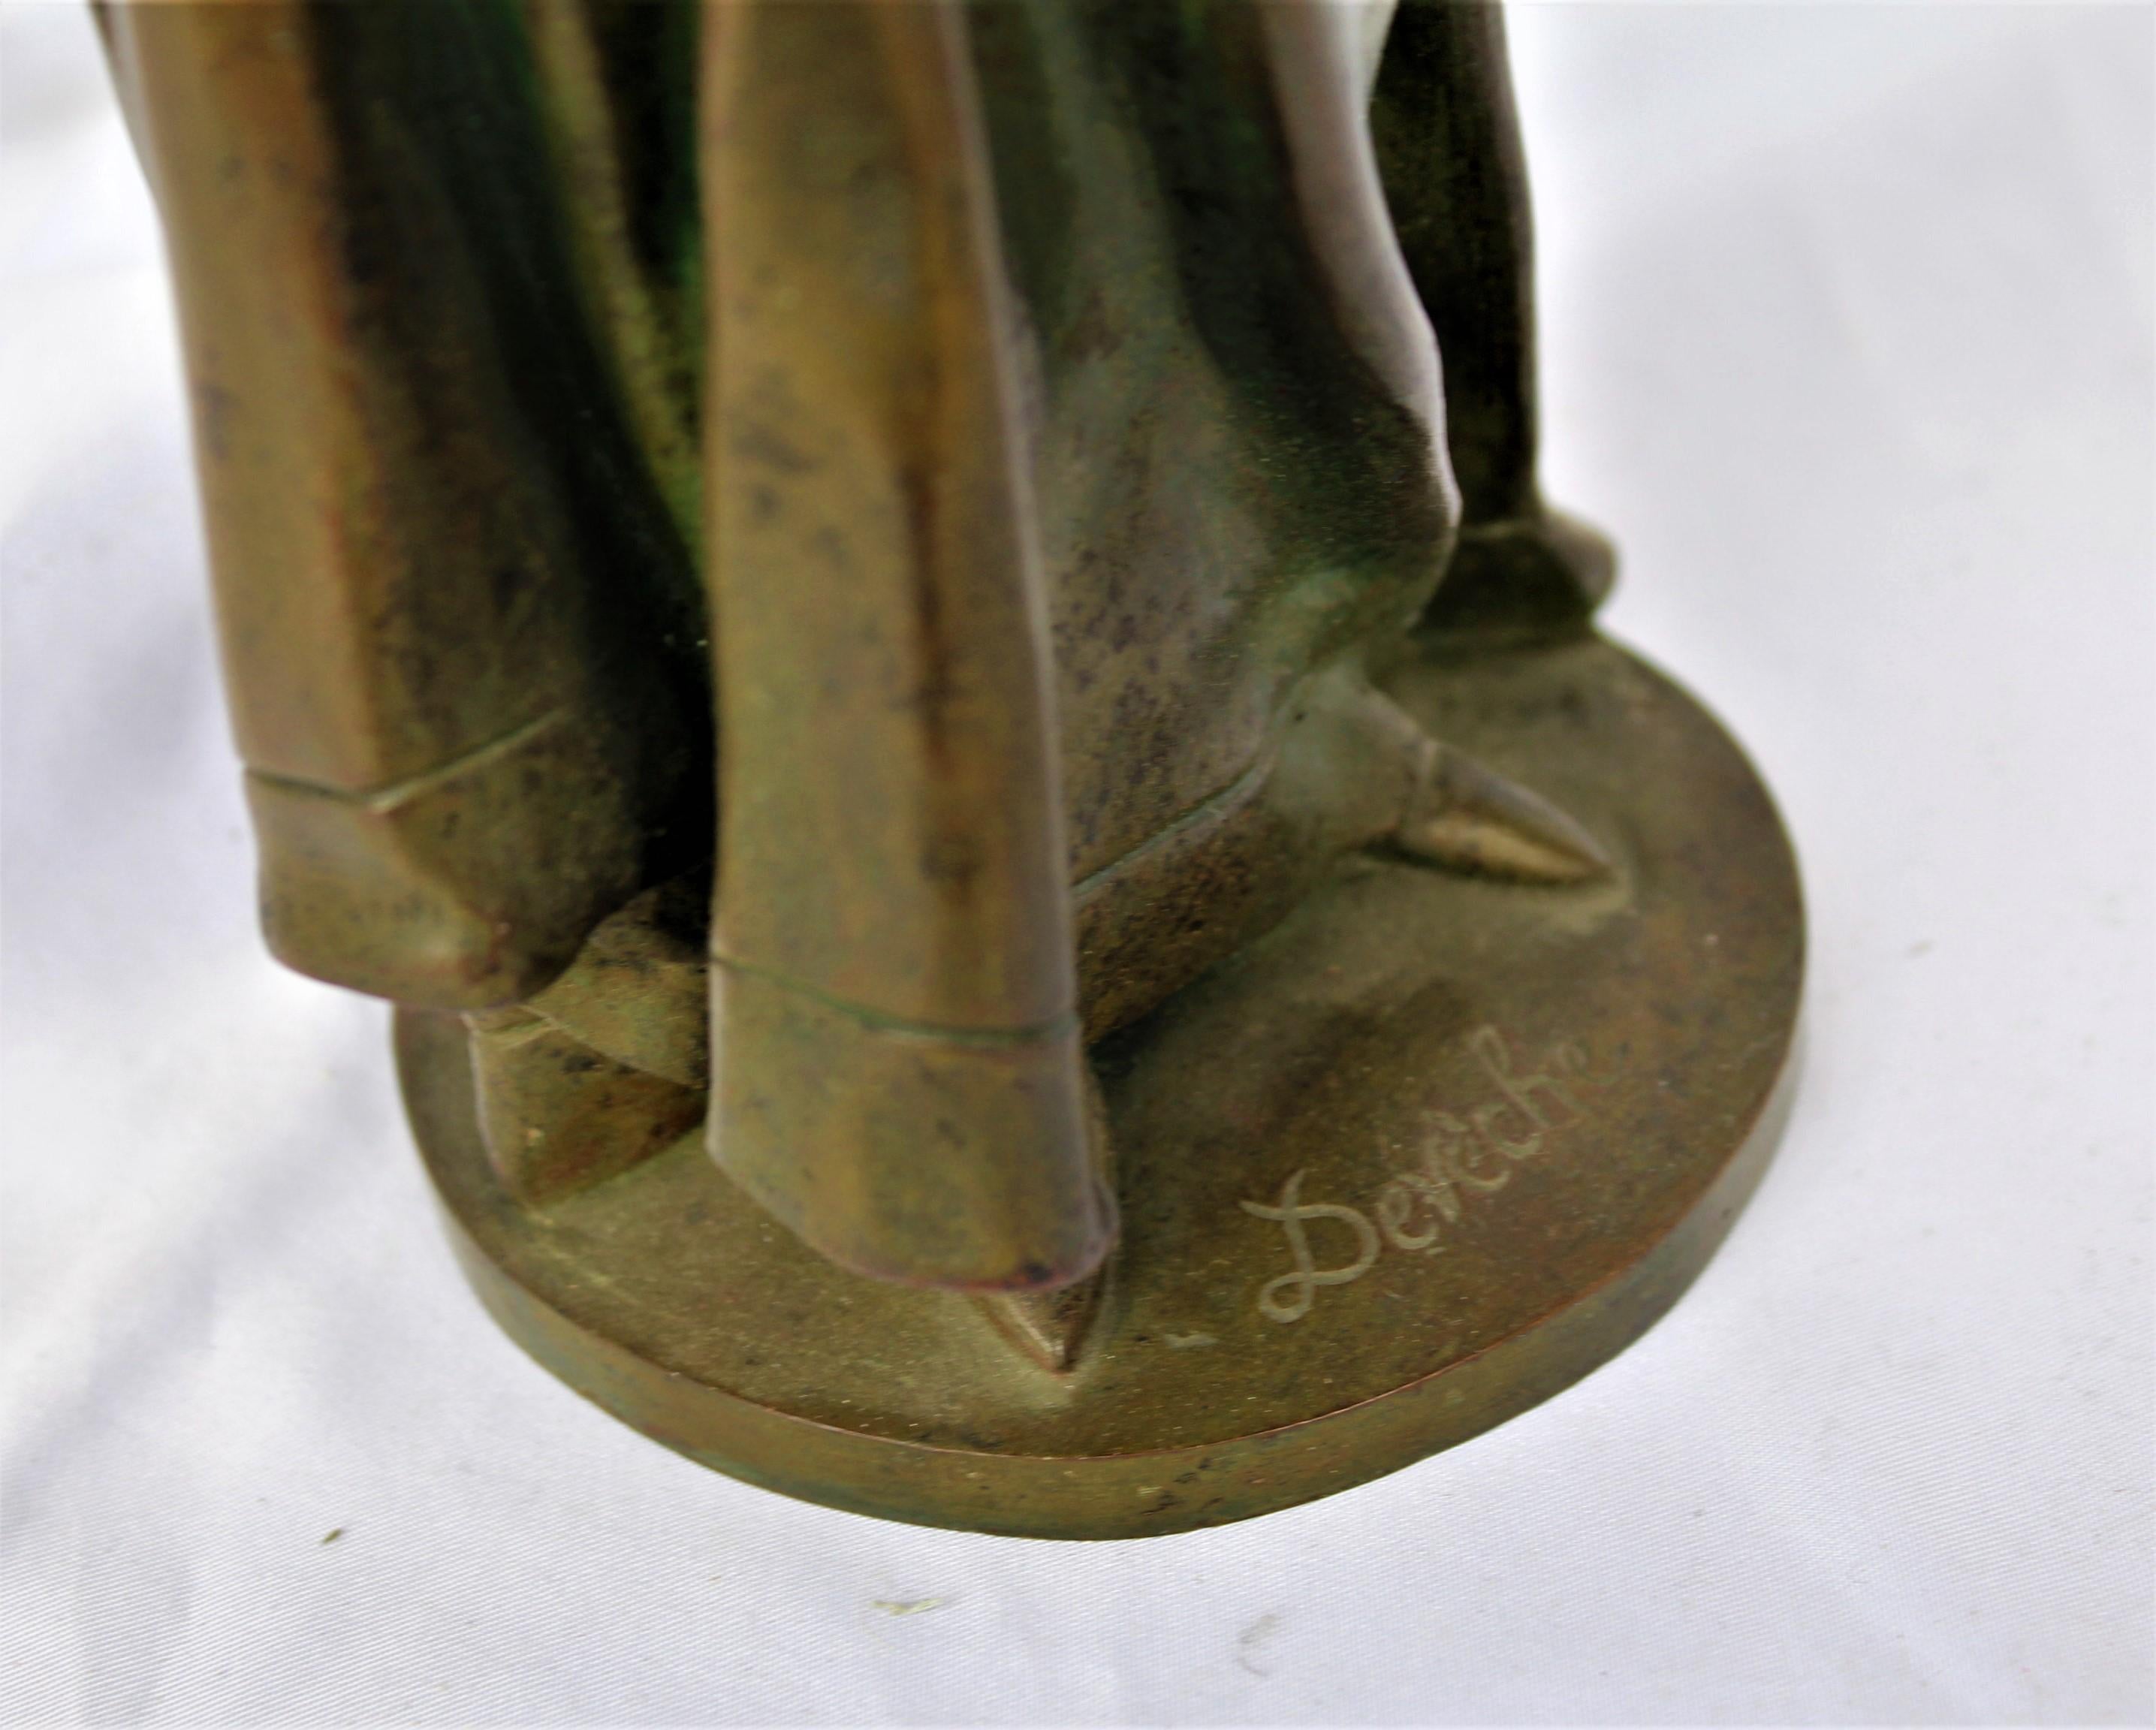 Graceful lady holding a book. Great Patina finish, signed by the artist in (Art Nouveau design) has artist signature on the base plate (Deve'che) from circa 1890s. Held in a private collection of bronzes. Has very fine details and age to it. Well